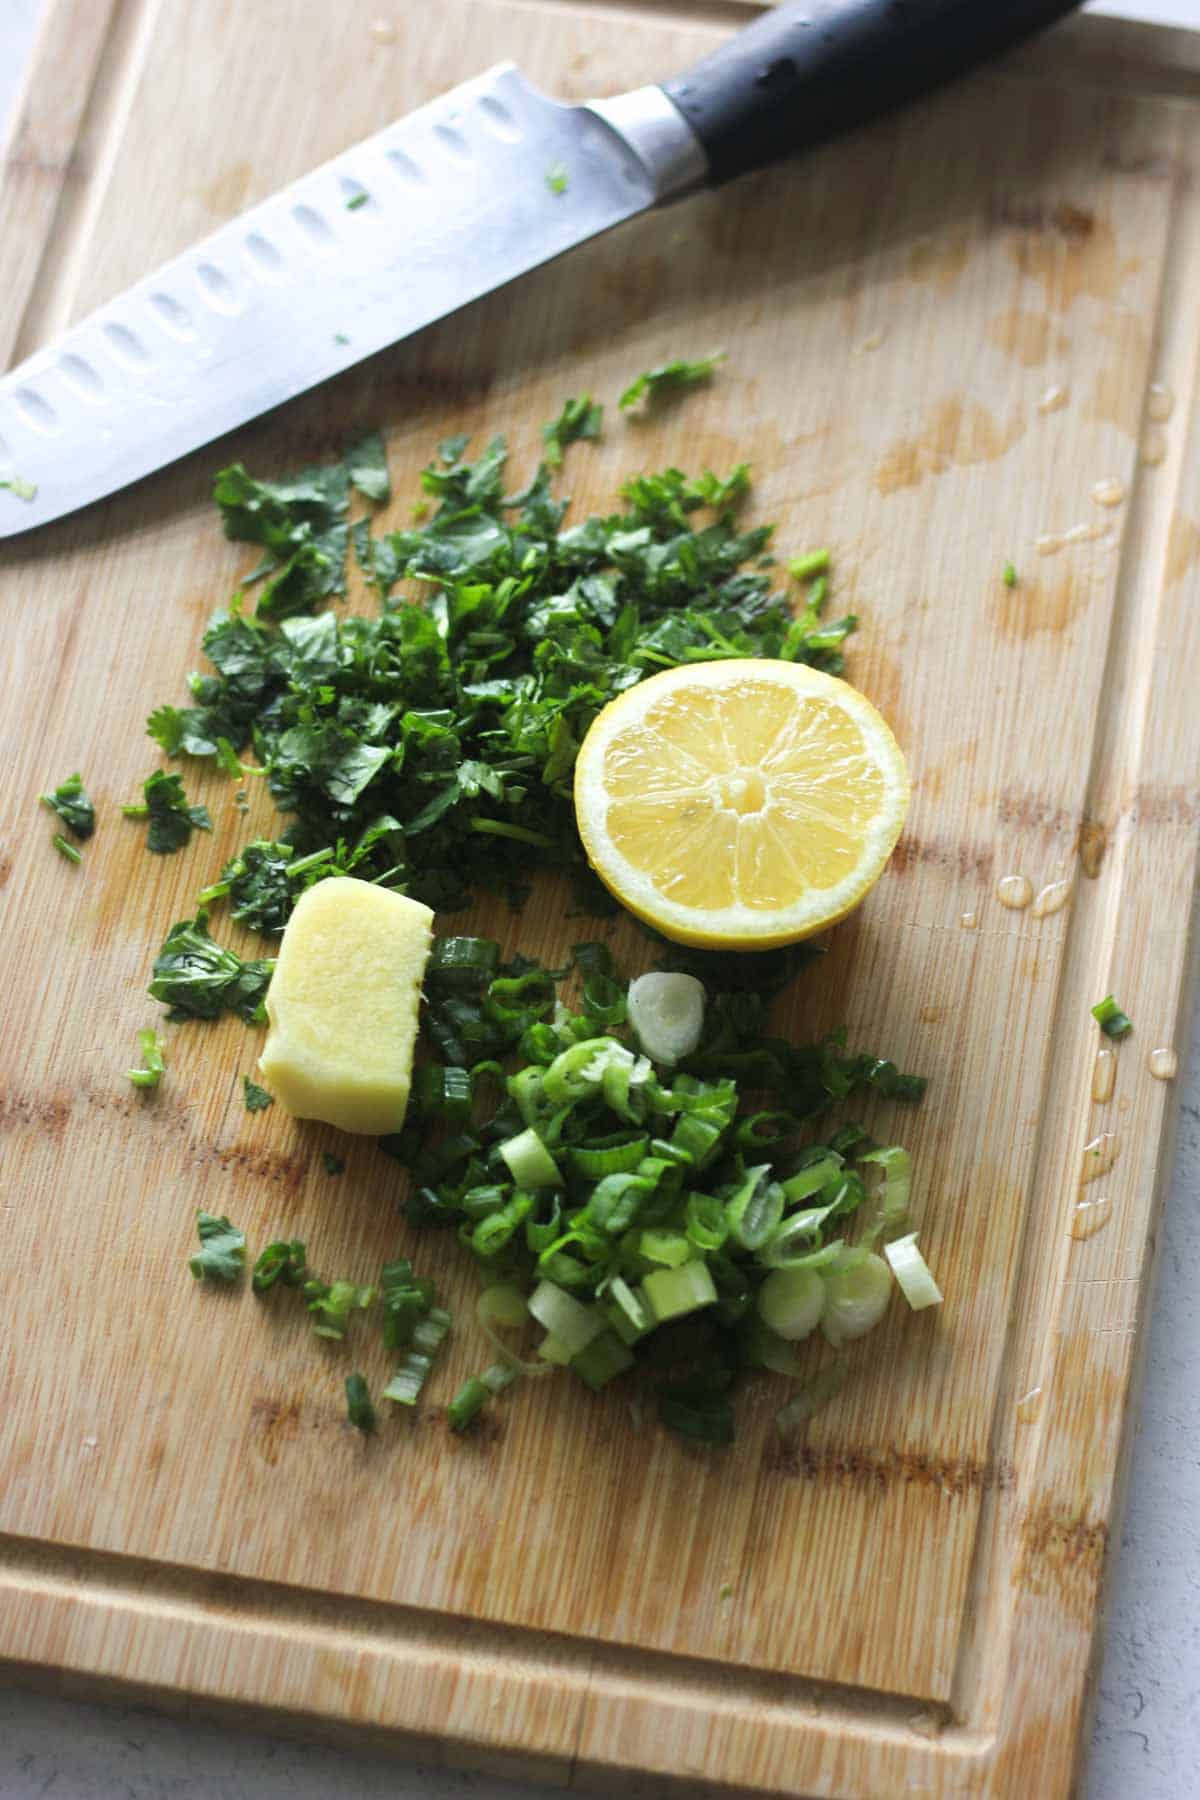 lemon, ginger, cilantro and green onions on the cutting board